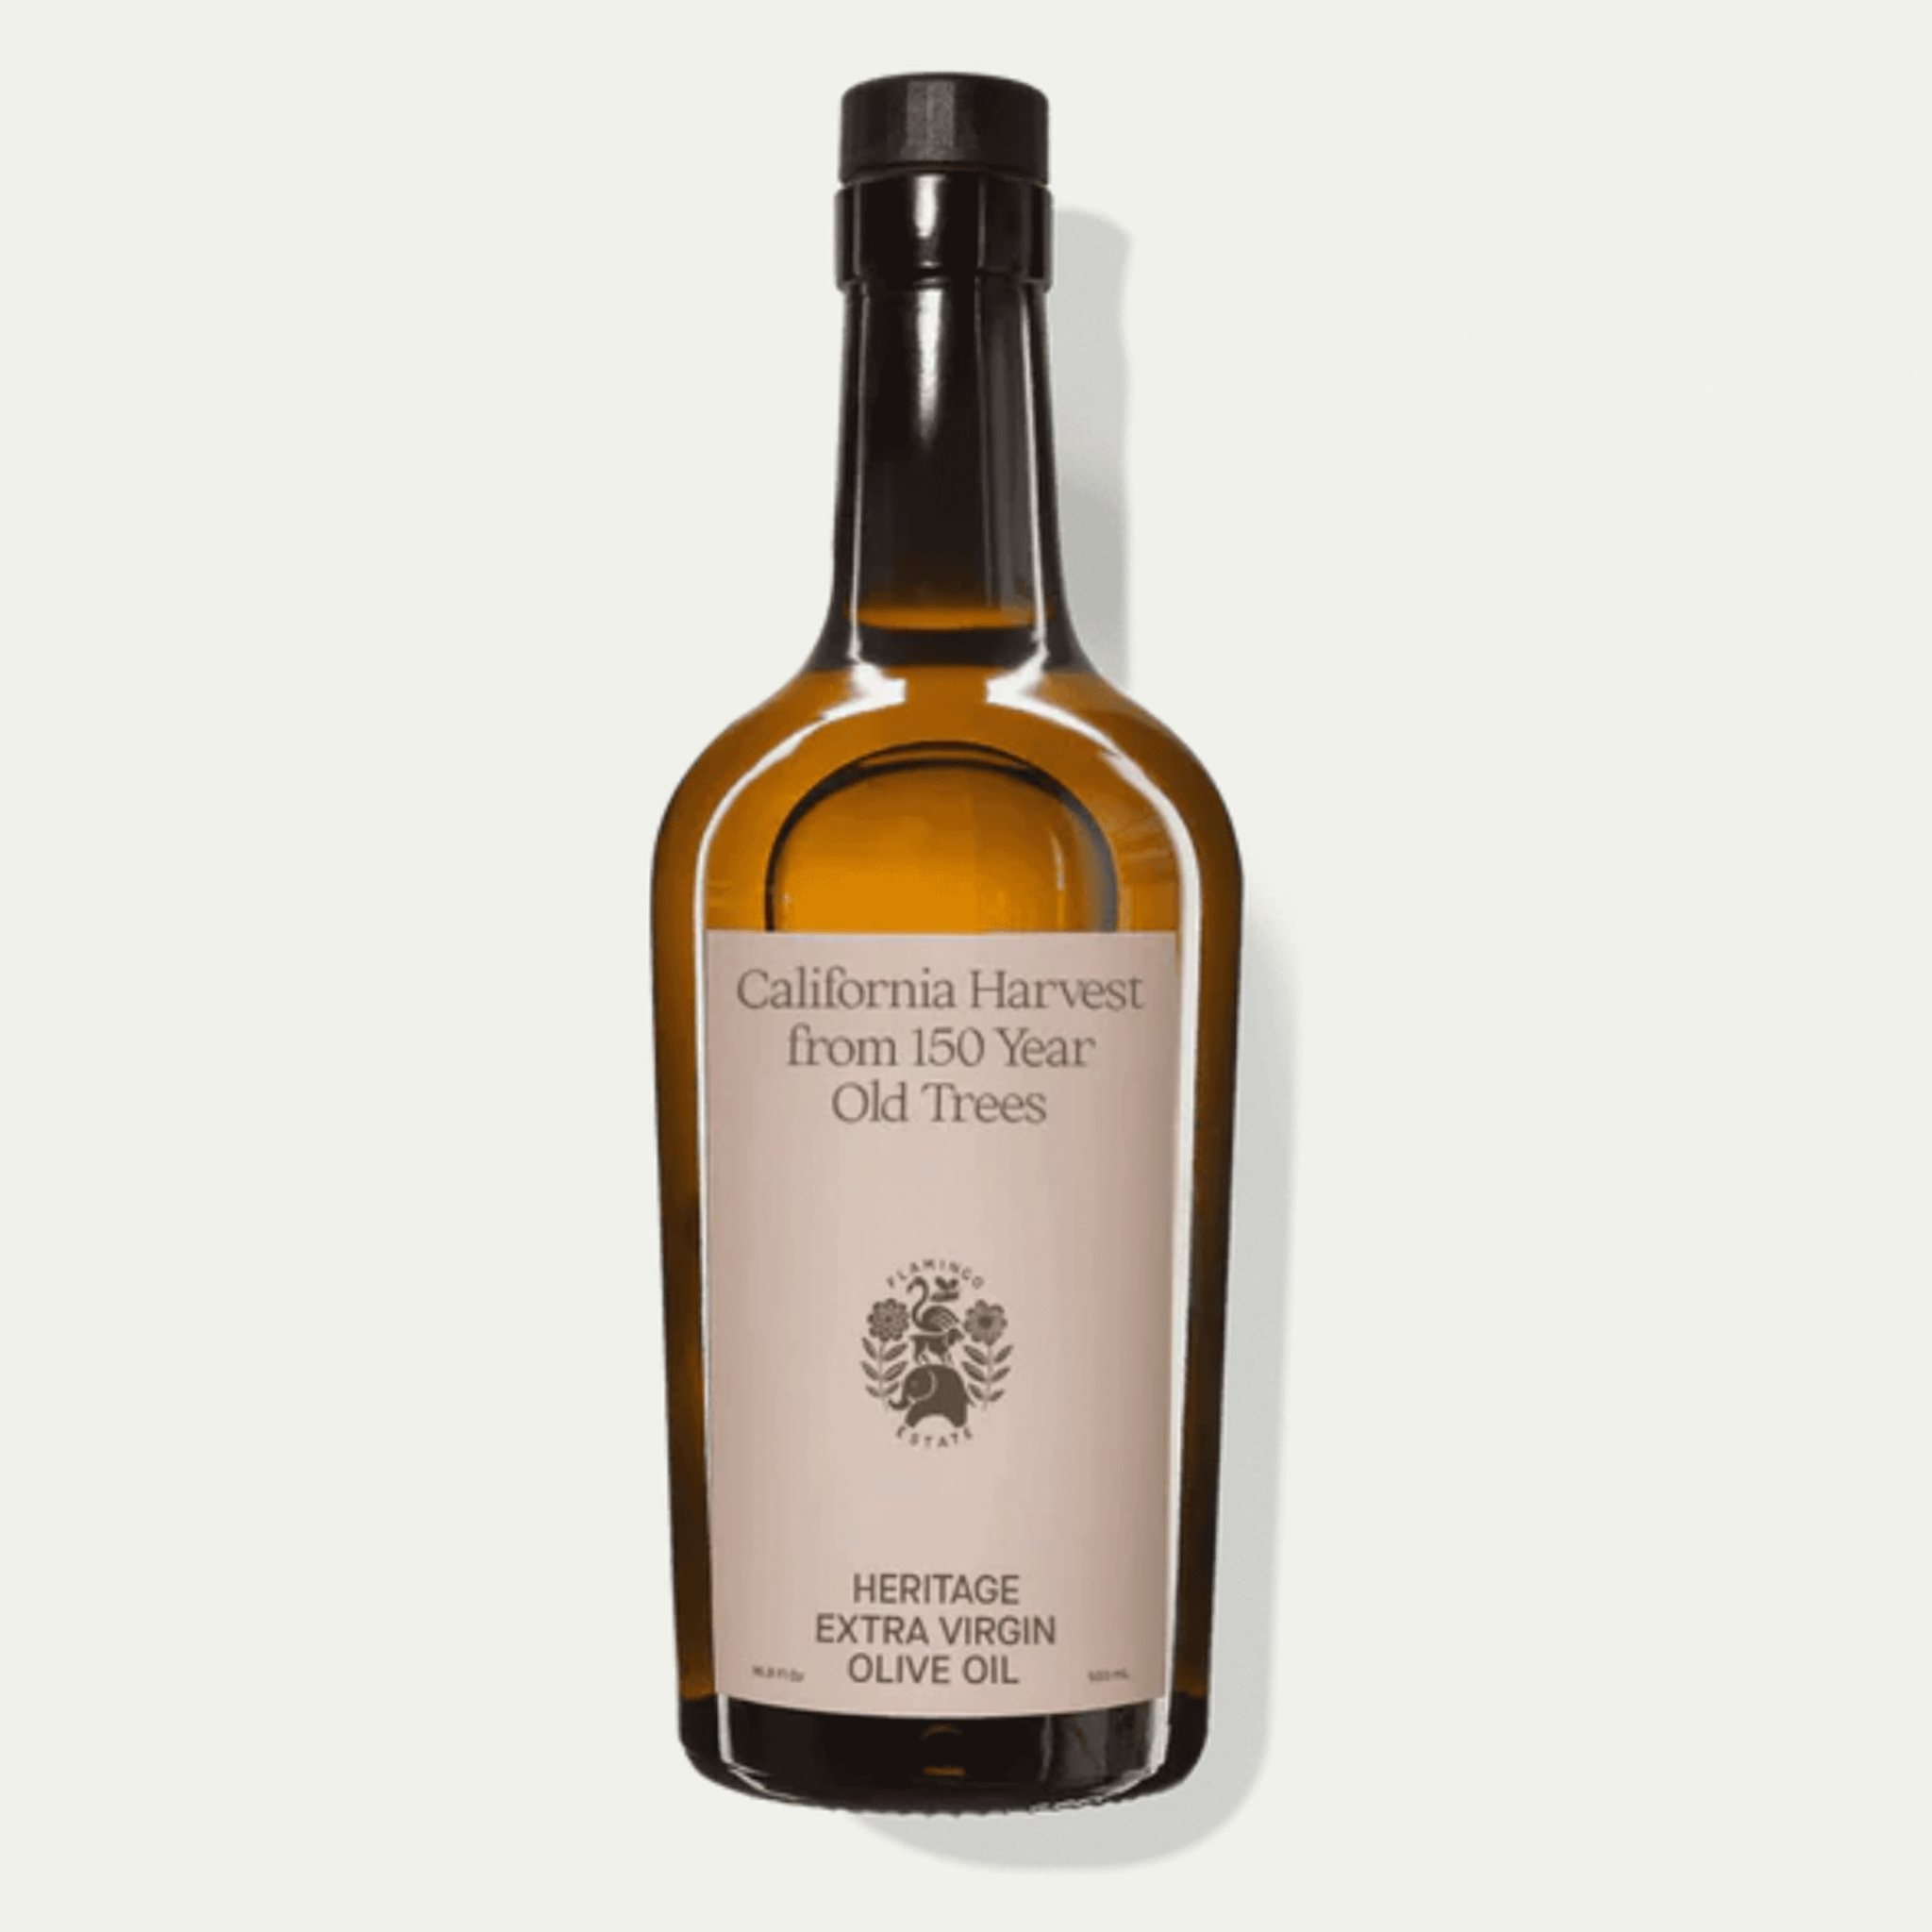 On a white background is a brown glass bottle of olive oil with a label on the front that reads, "California Harvest from 150 Year Old Trees".  